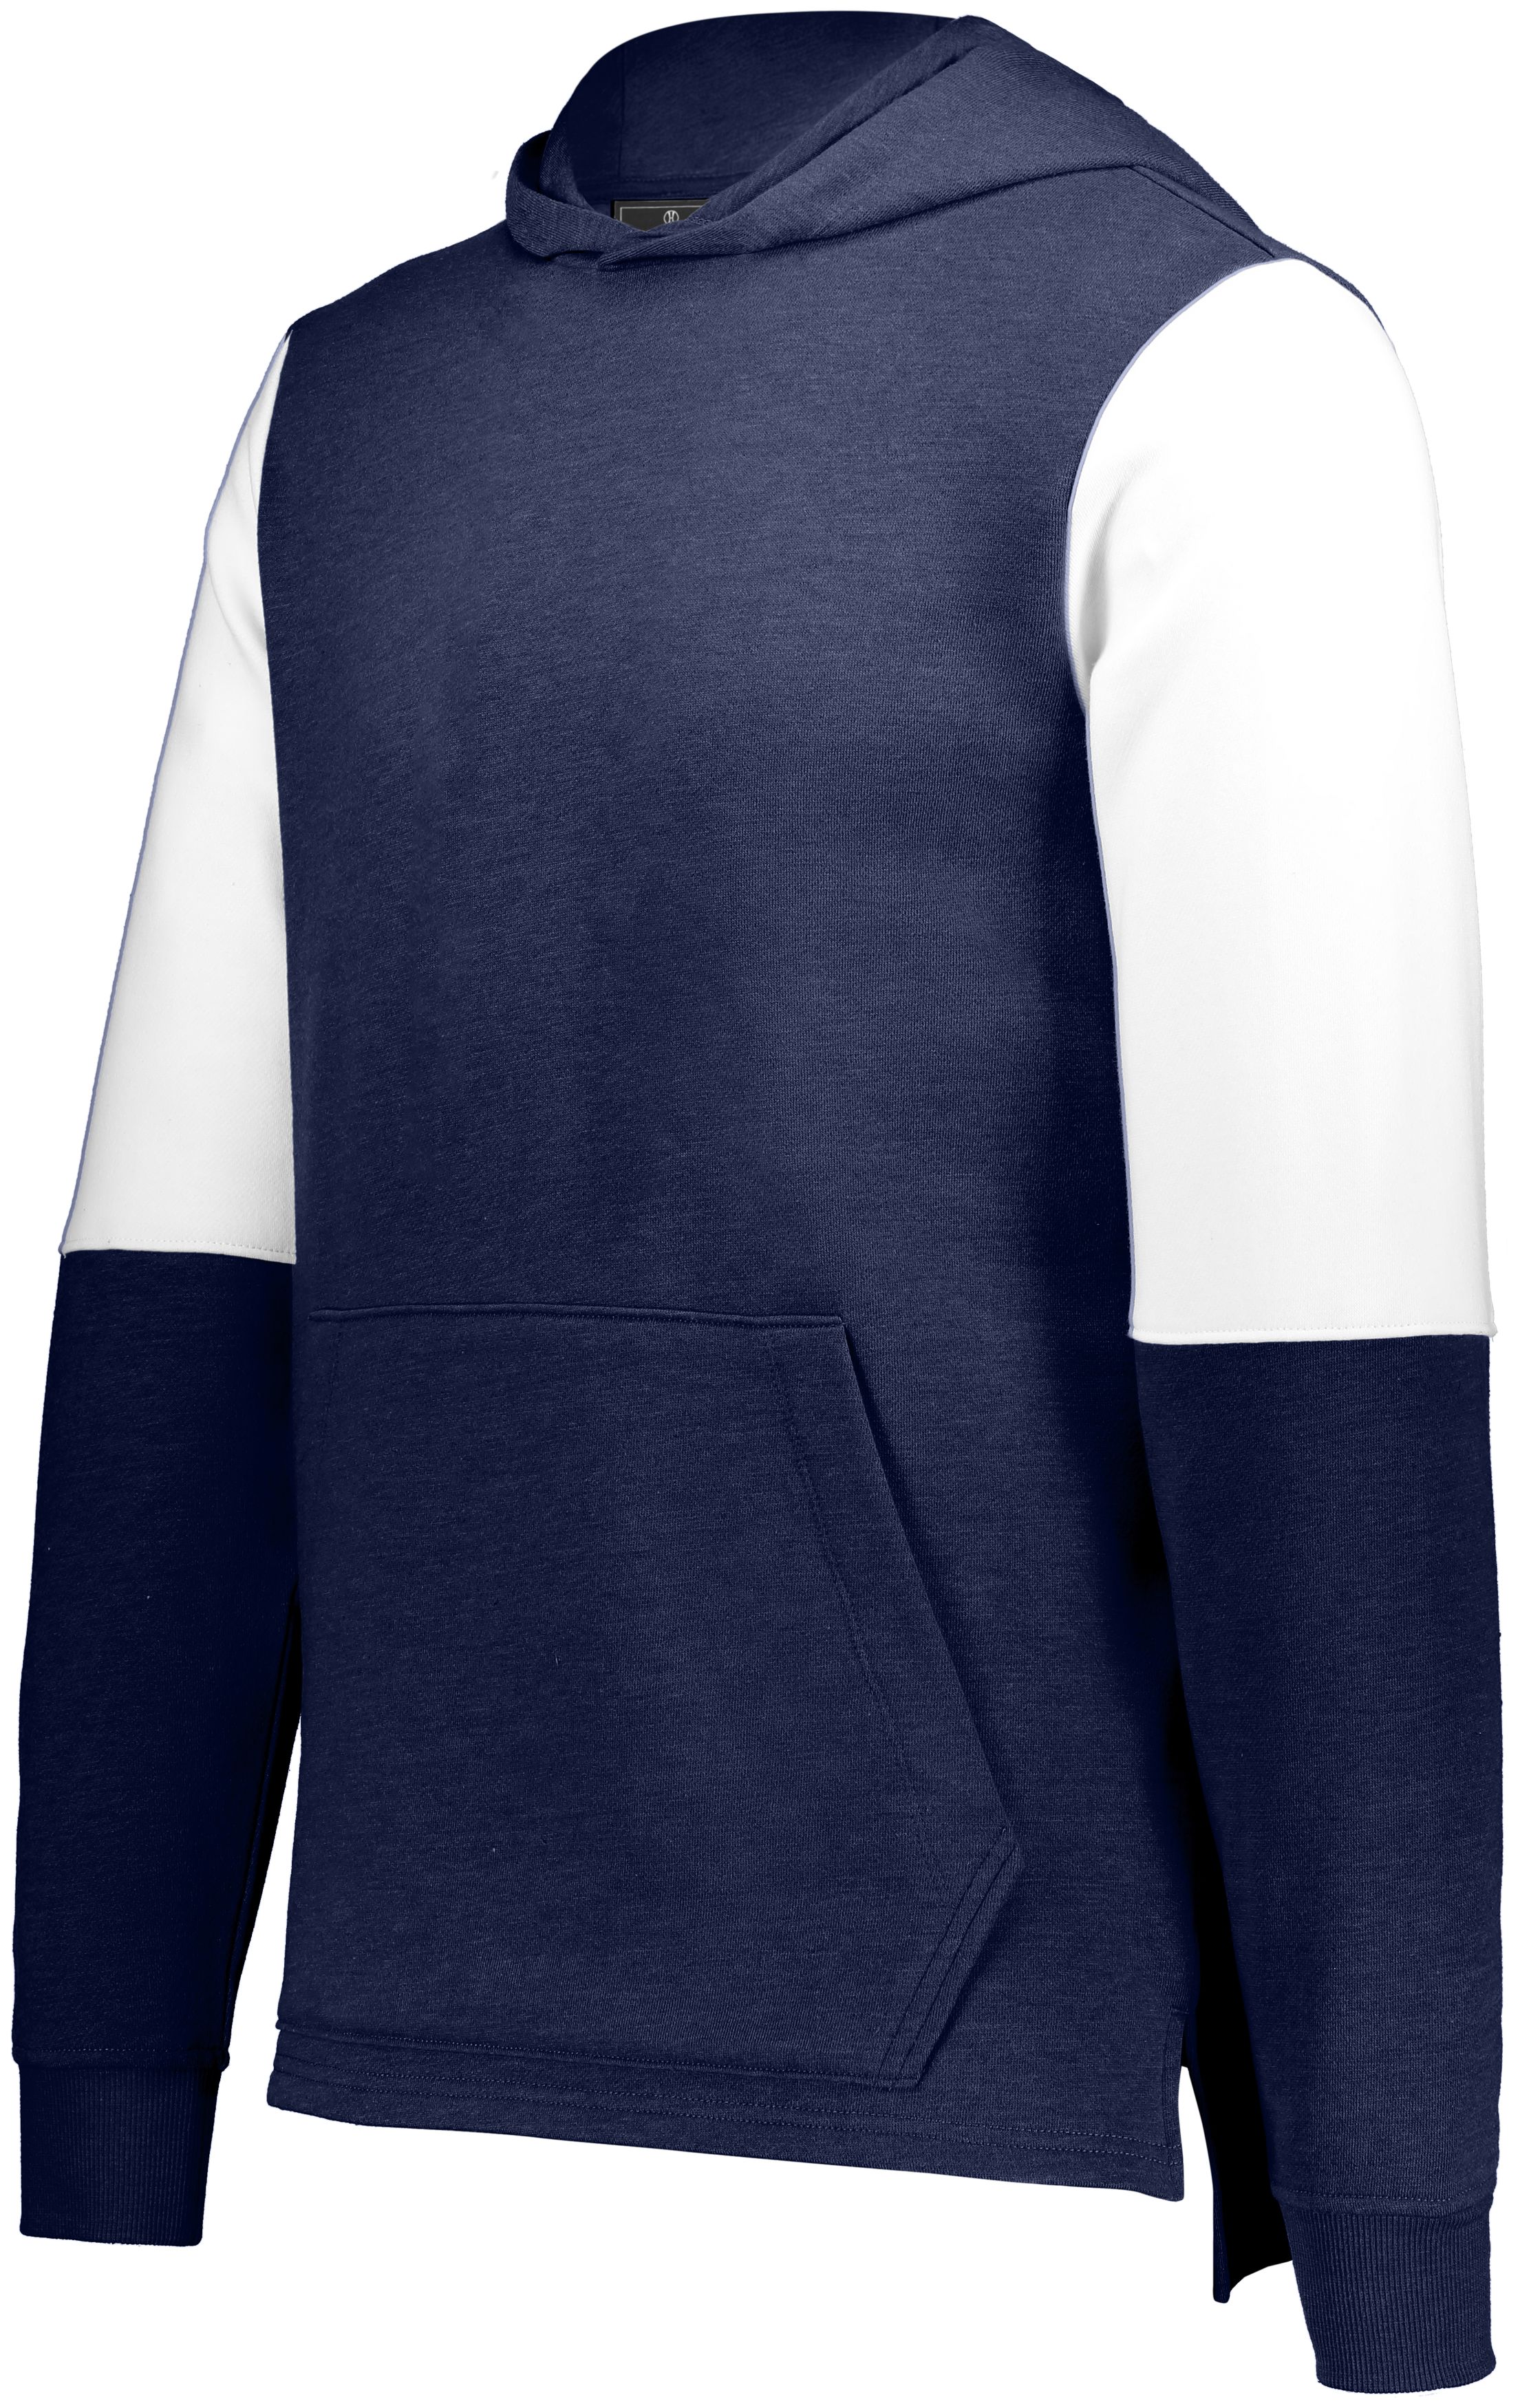 click to view Navy Heather/White